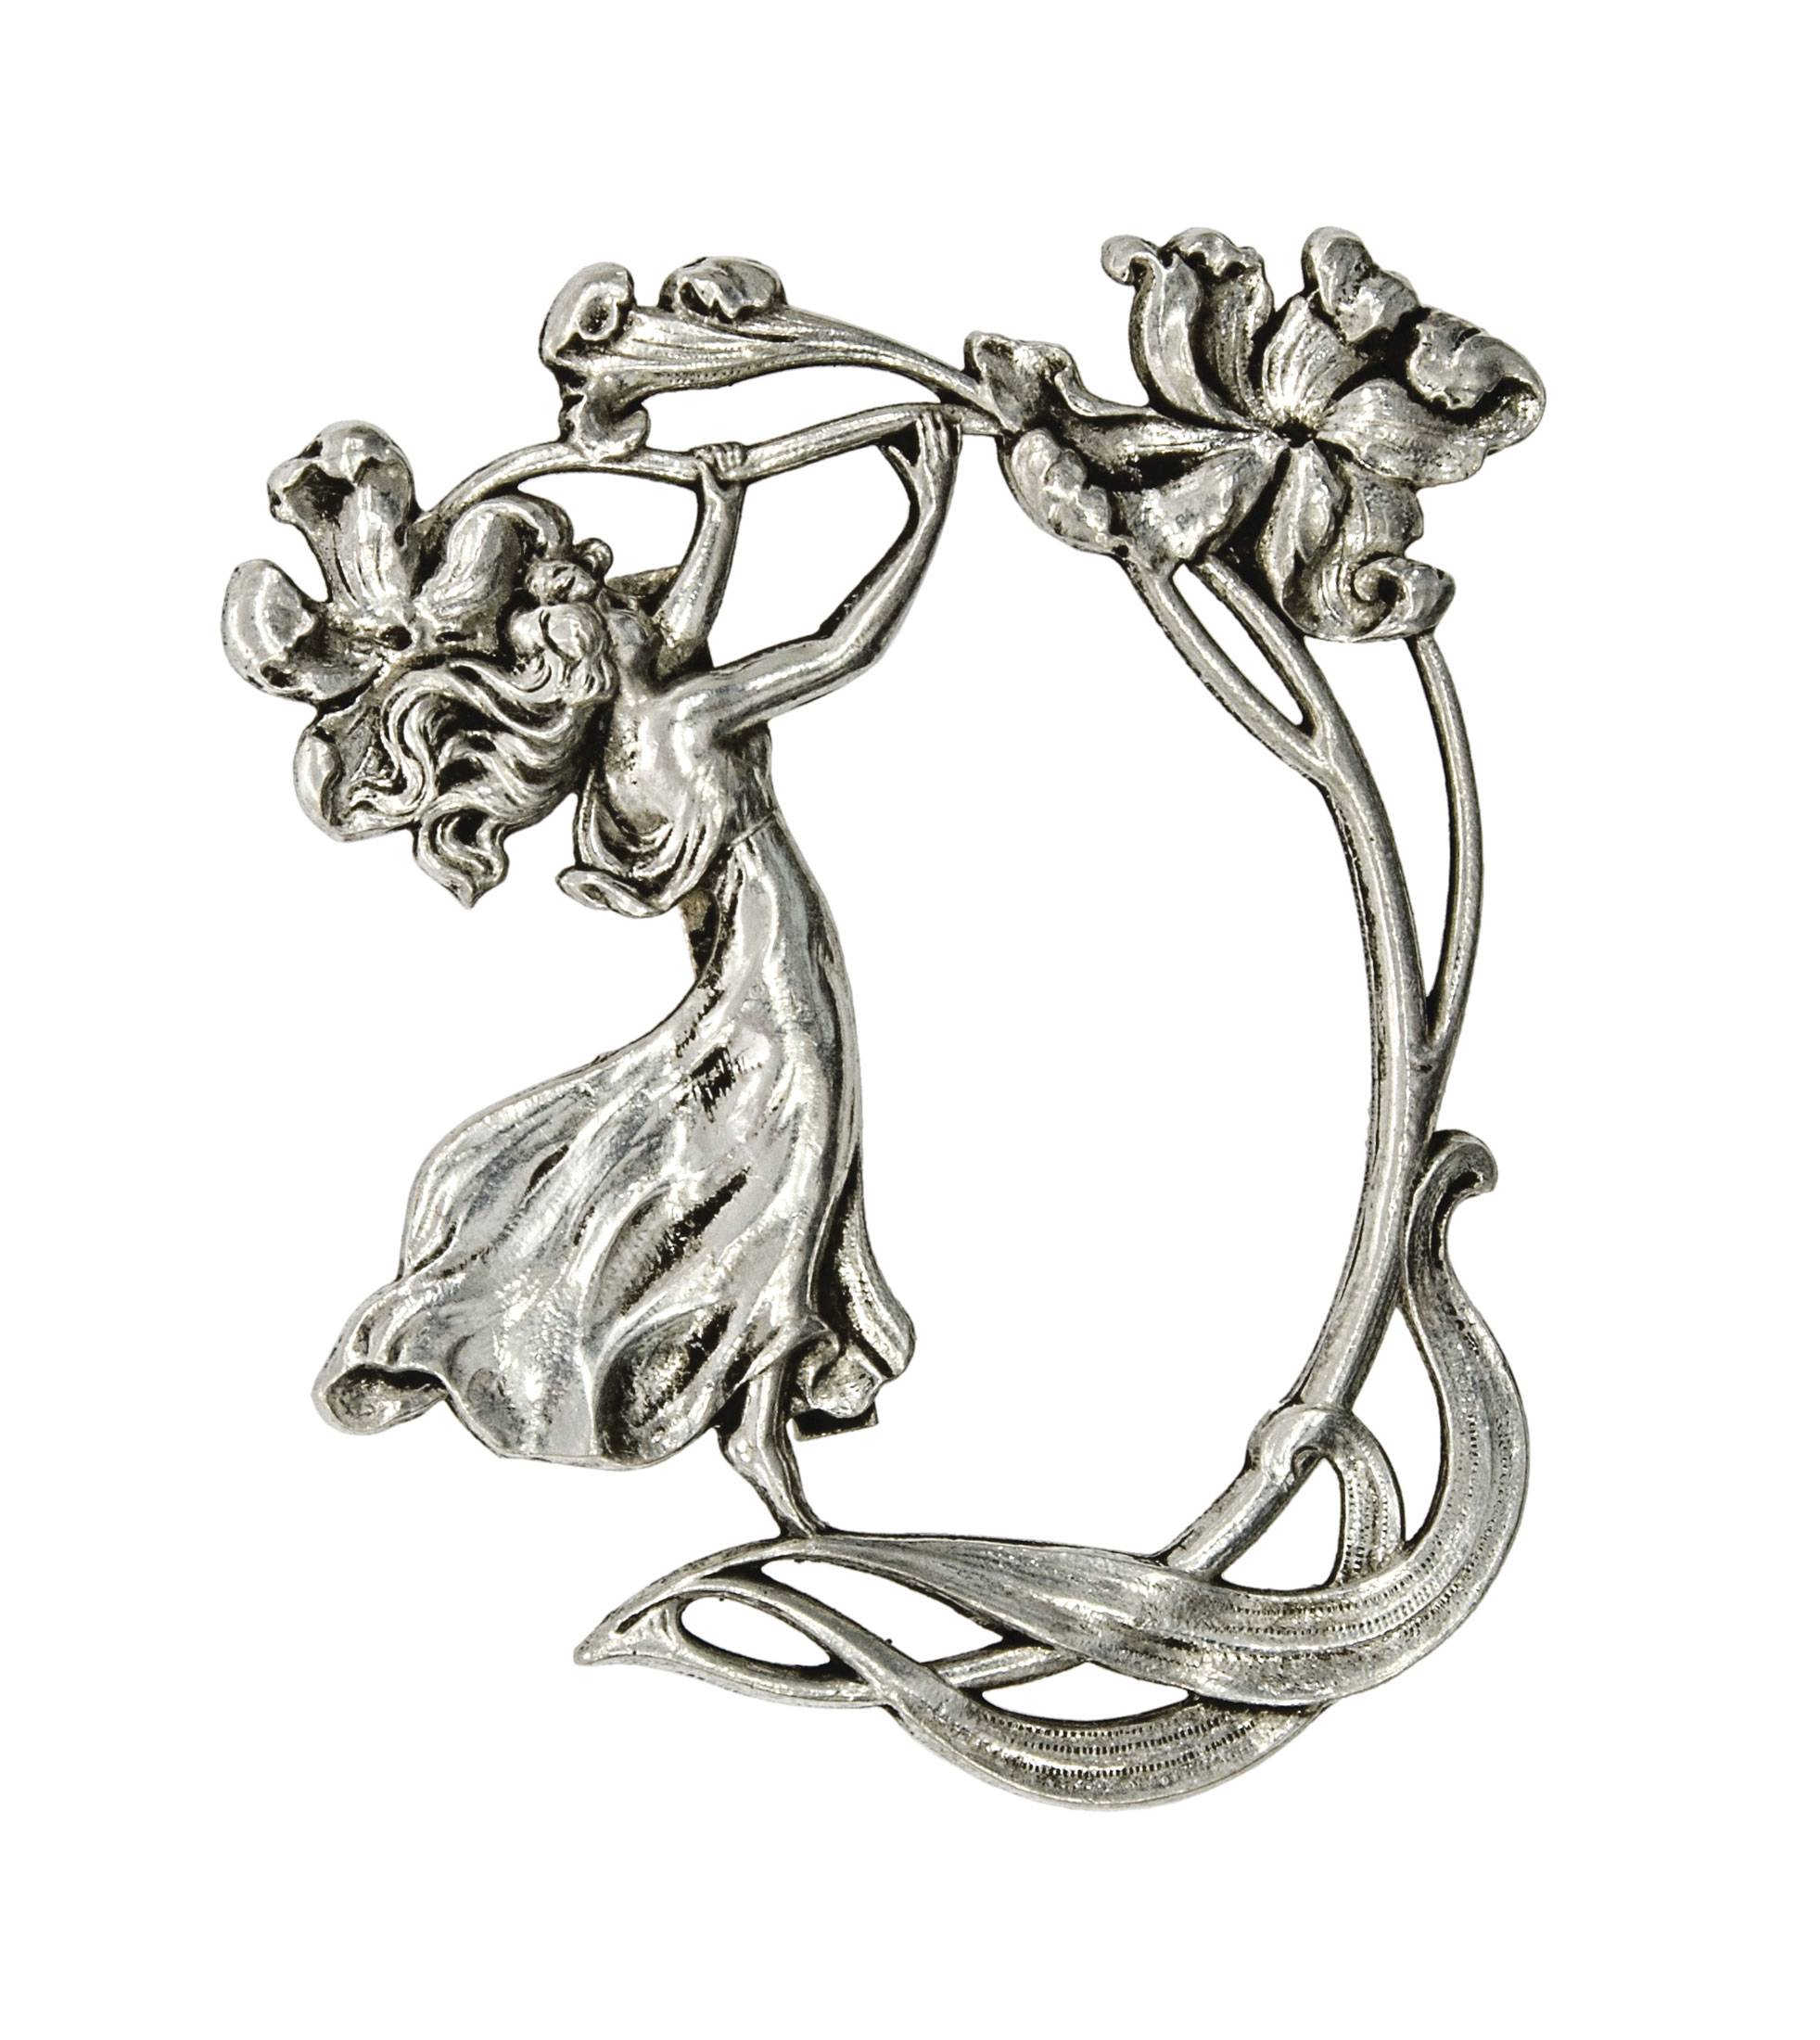 Brooch Austrian, around 1900, metal alloy, girl with flowers imagery, m: 8 cm Brosche